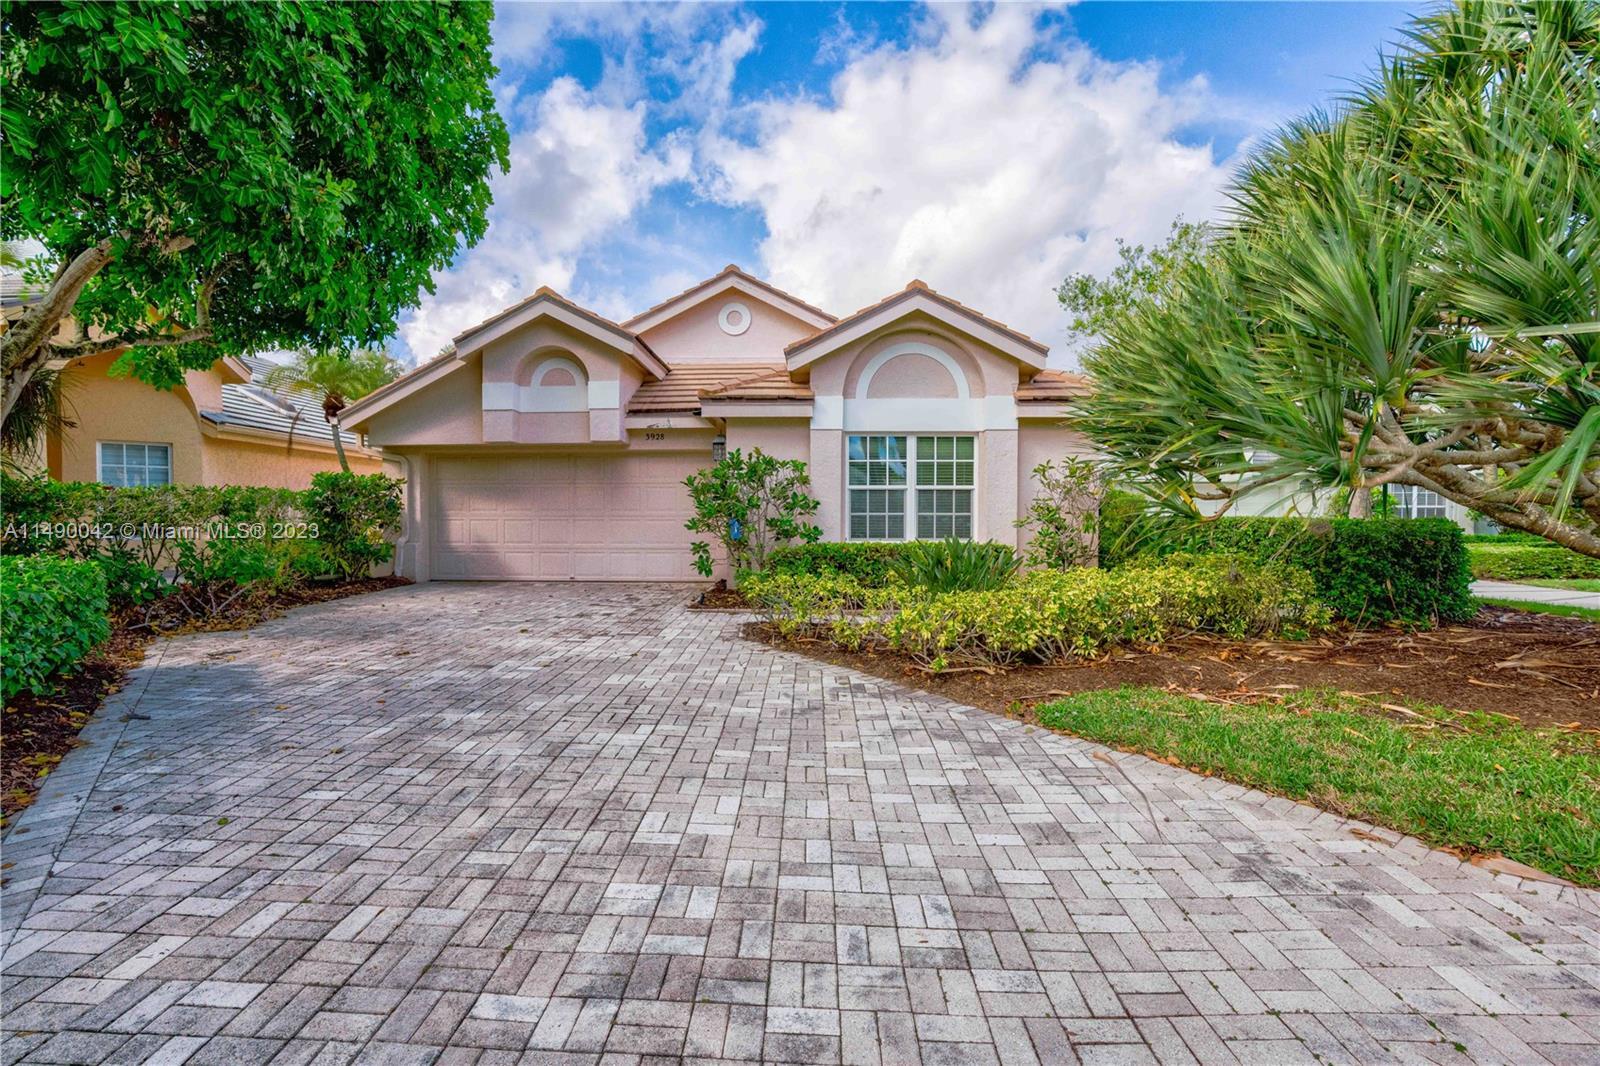 Welcome to this charming home nestled within a serene golf community. This 3-bedroom 2-1/2-bath resi